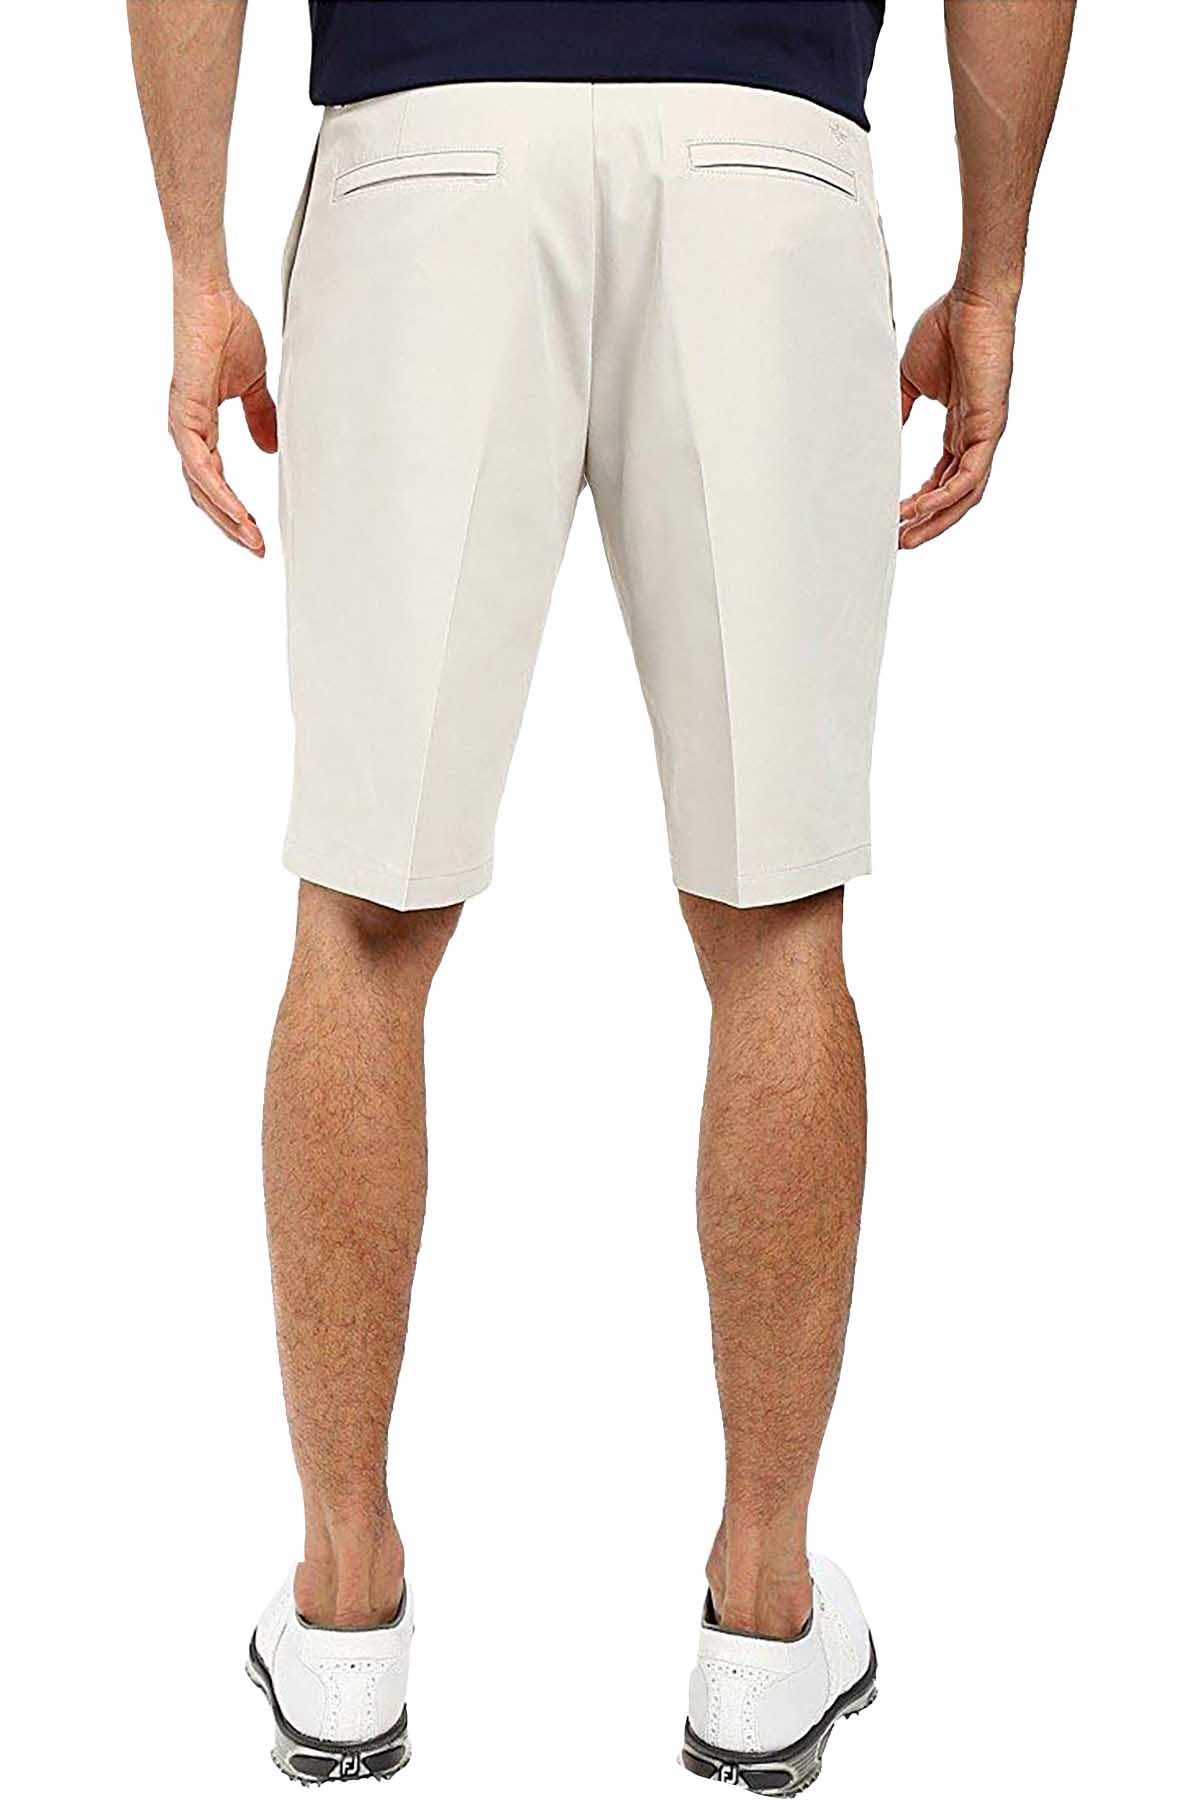 Dockers Marble Classic Flat-Front Golf Short